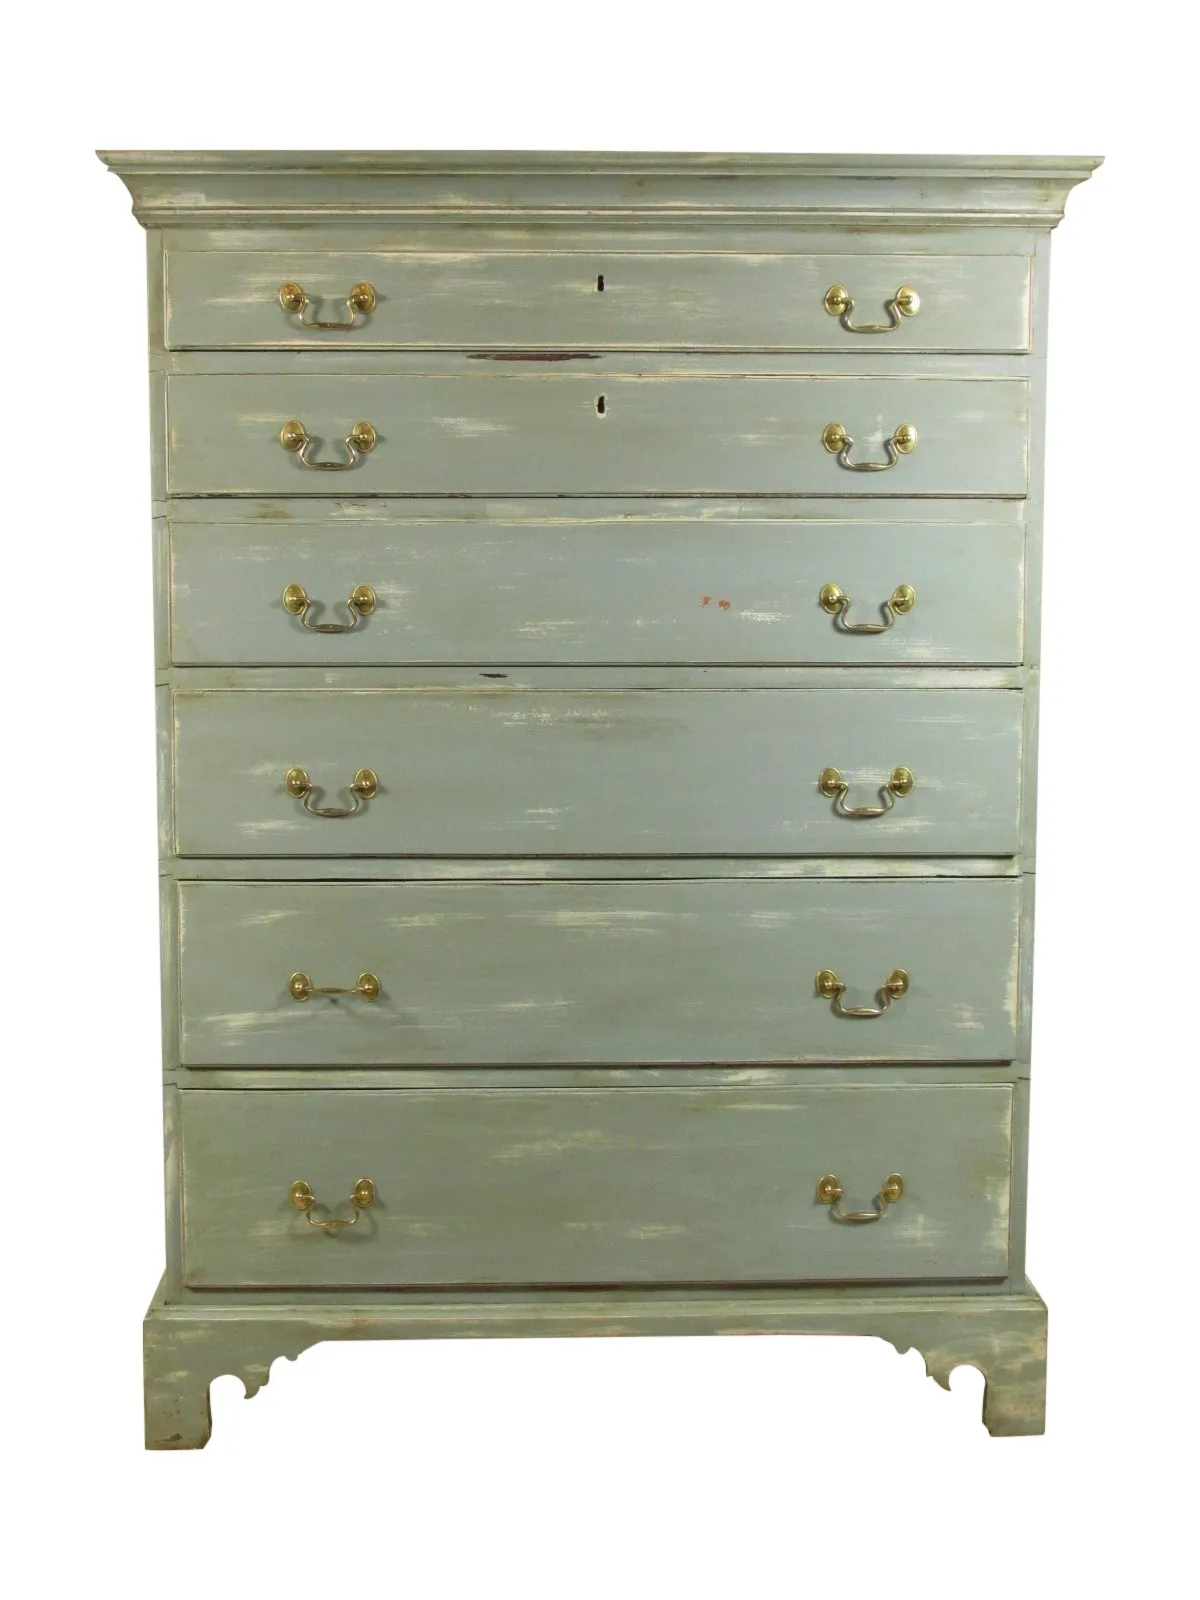 18th-C. American Painted Chest - The Barn at 17 Antiques - Gray